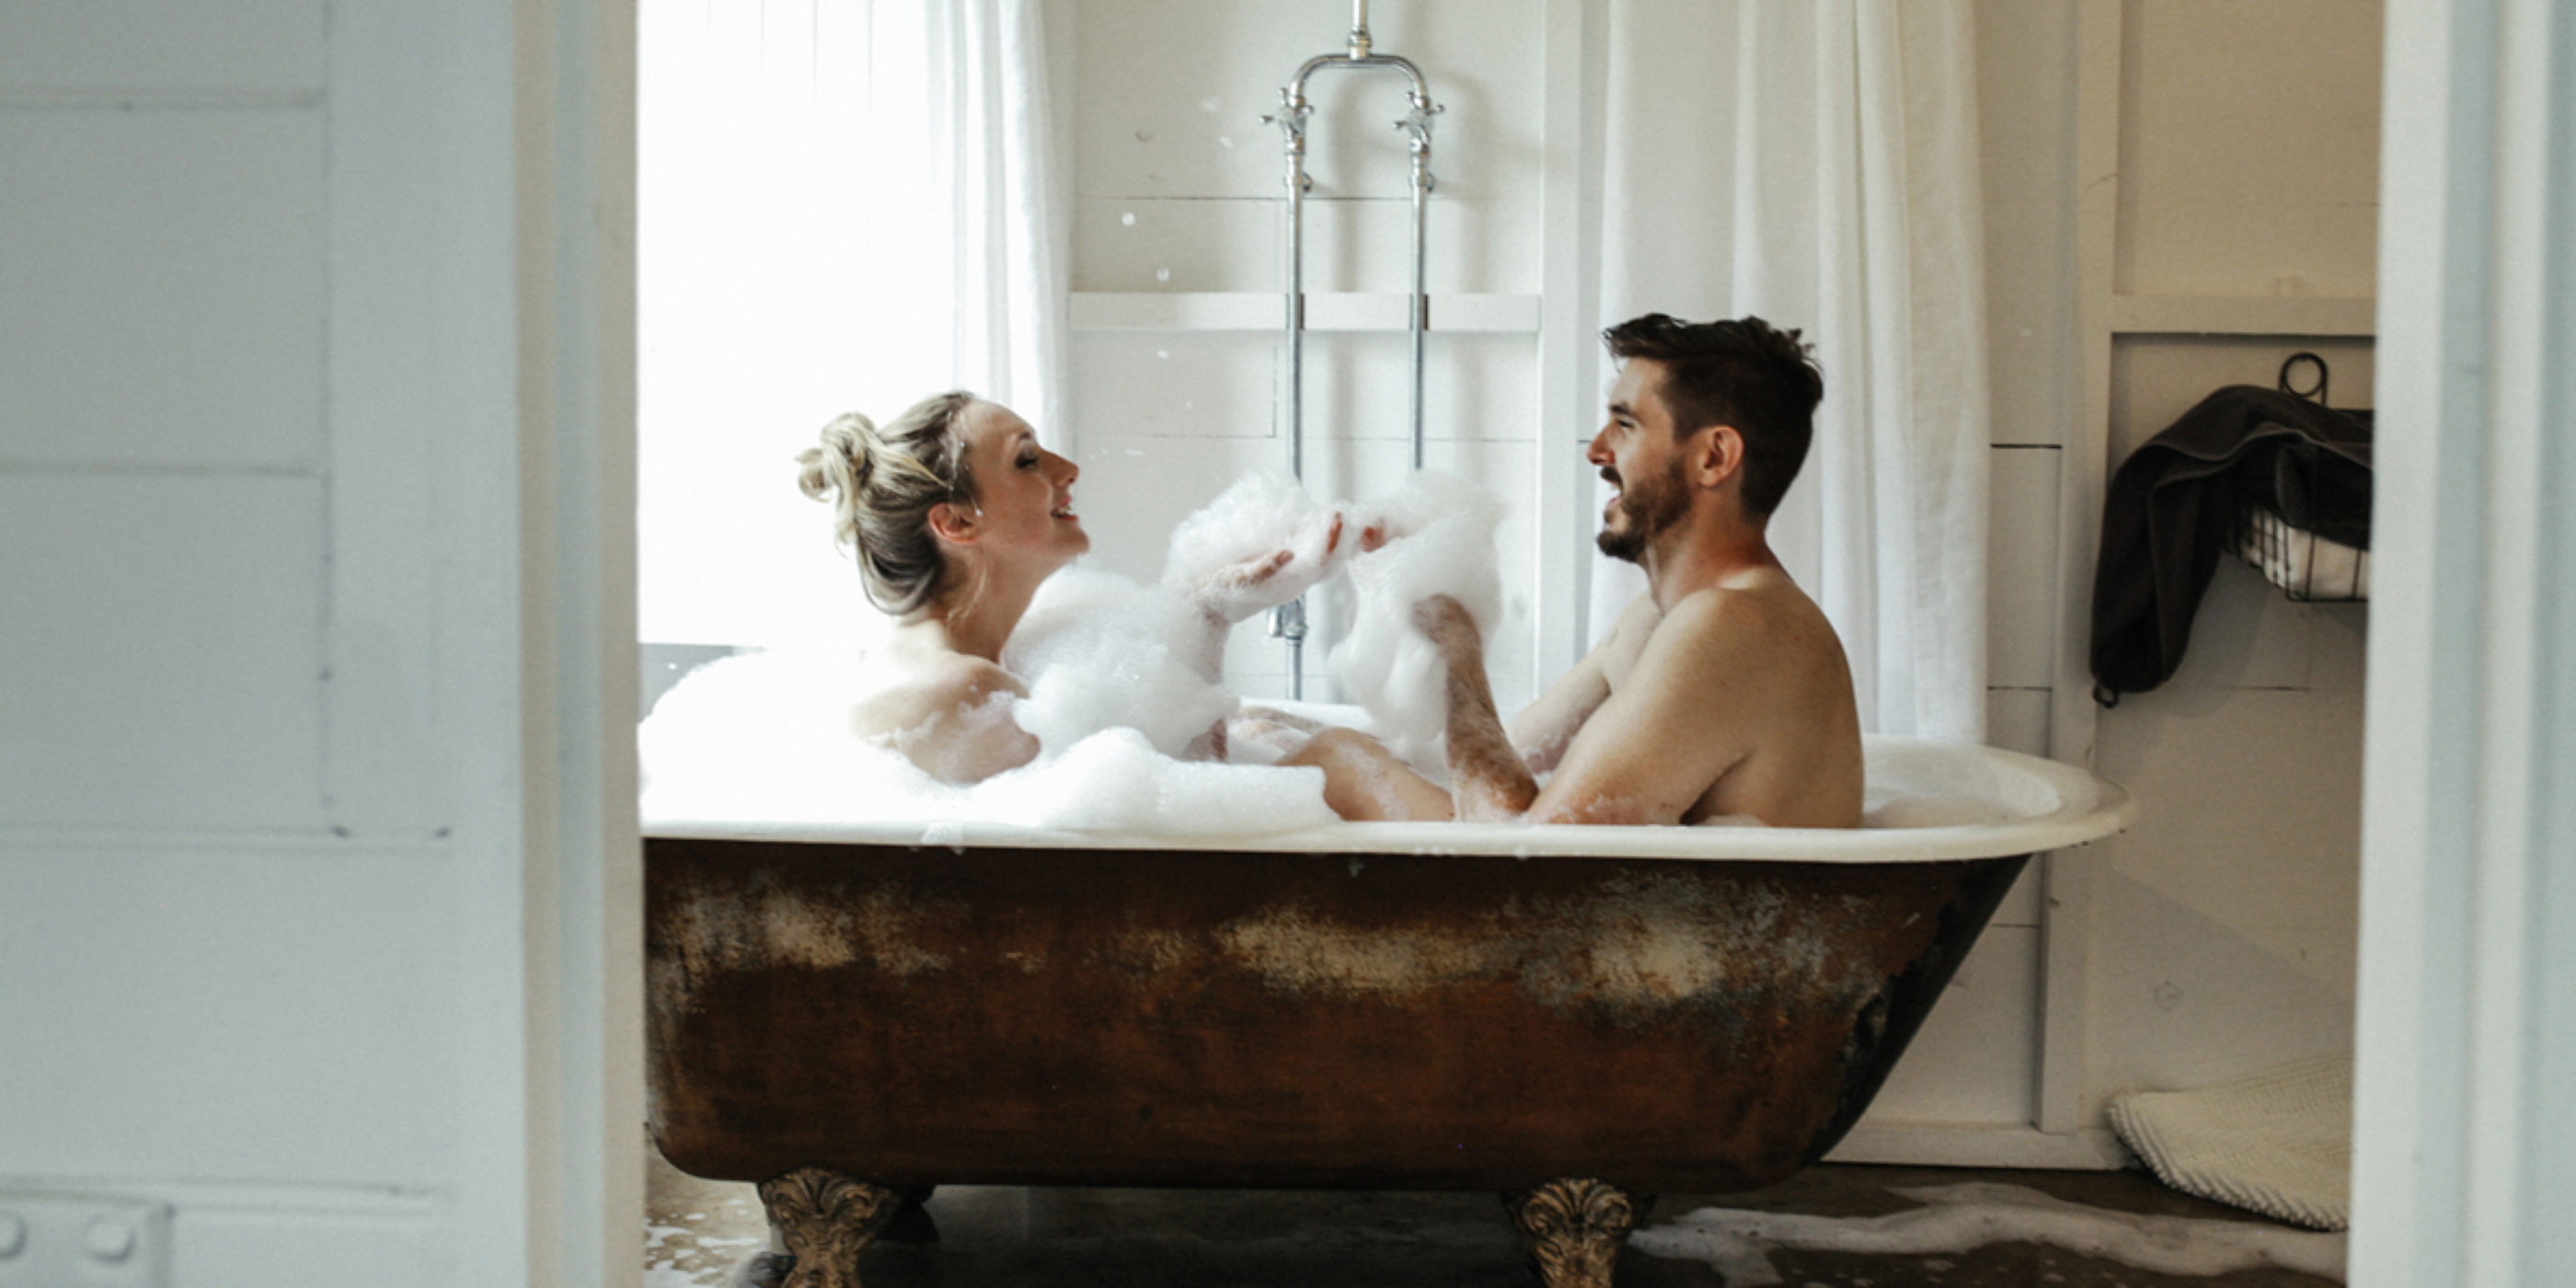 10 Romantic Ways to Surprise Your Husband on Your Wedding Night